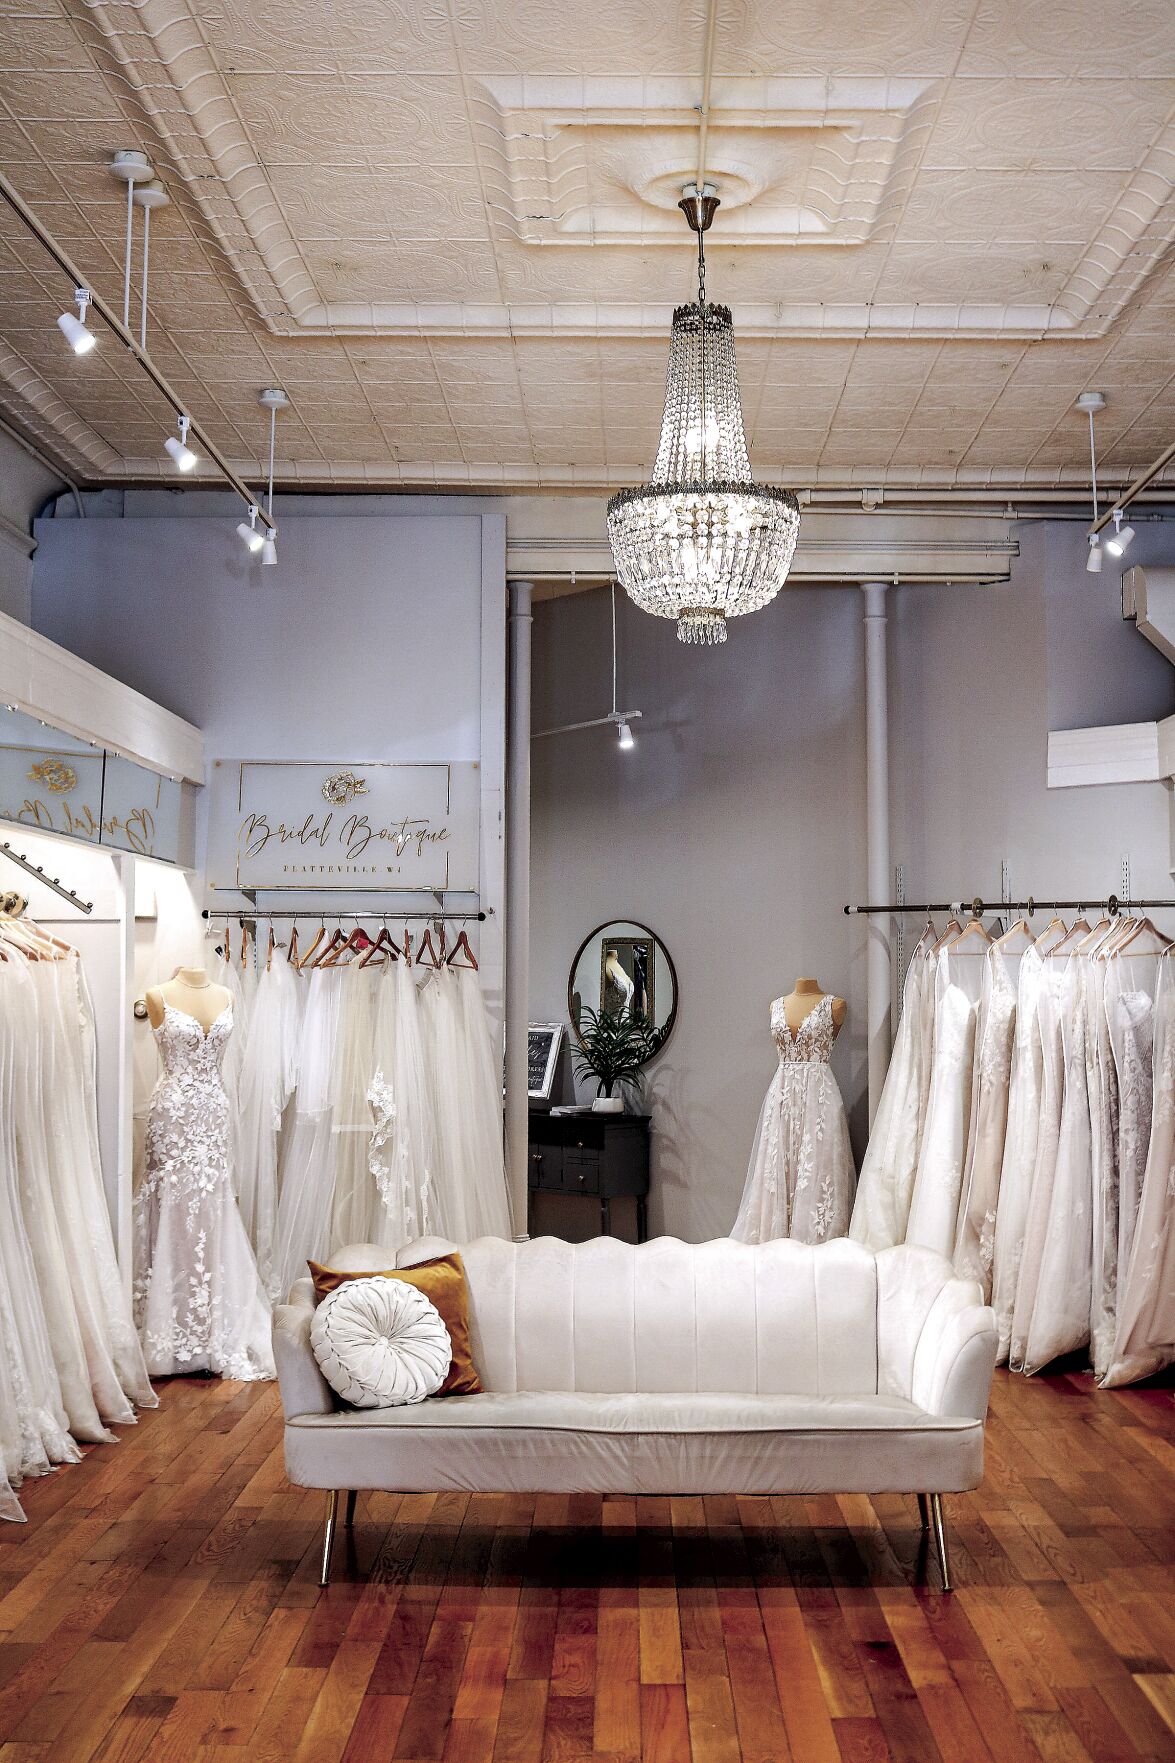 The interior of Bridal Boutique at 40 E. Main St. in Platteville, Wis.    PHOTO CREDIT: Contributed